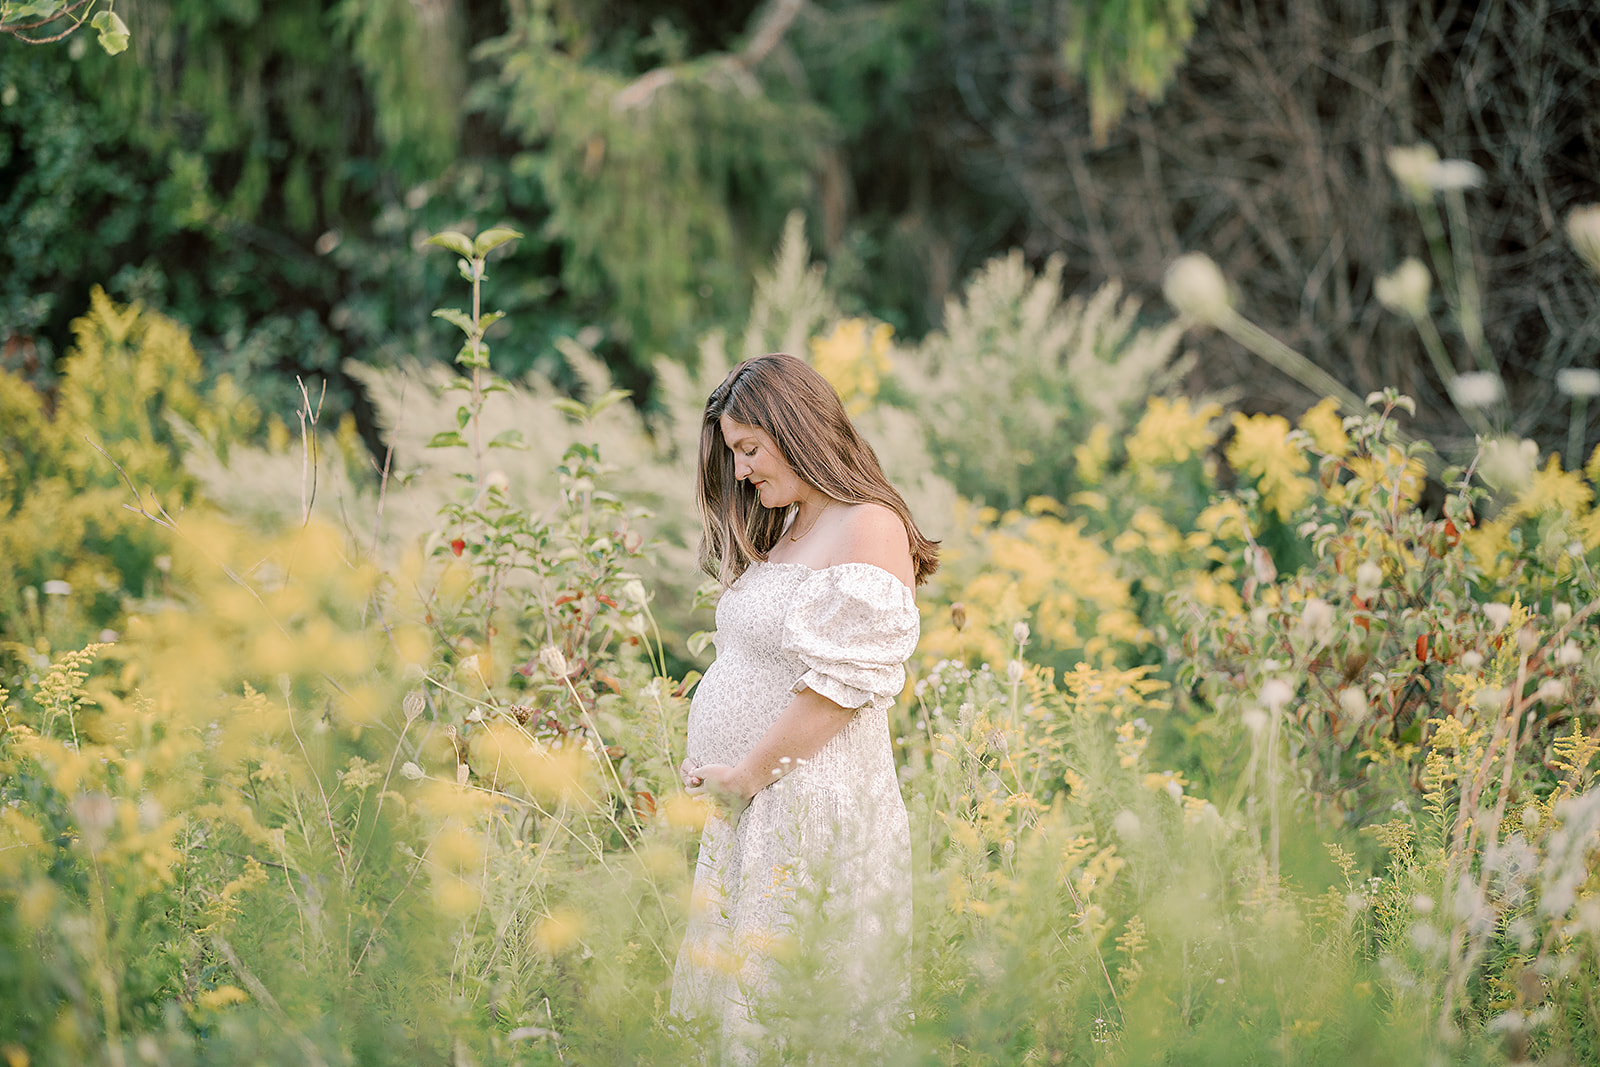 Pregnant mom holding and looking down at her belly while in a field of flowers